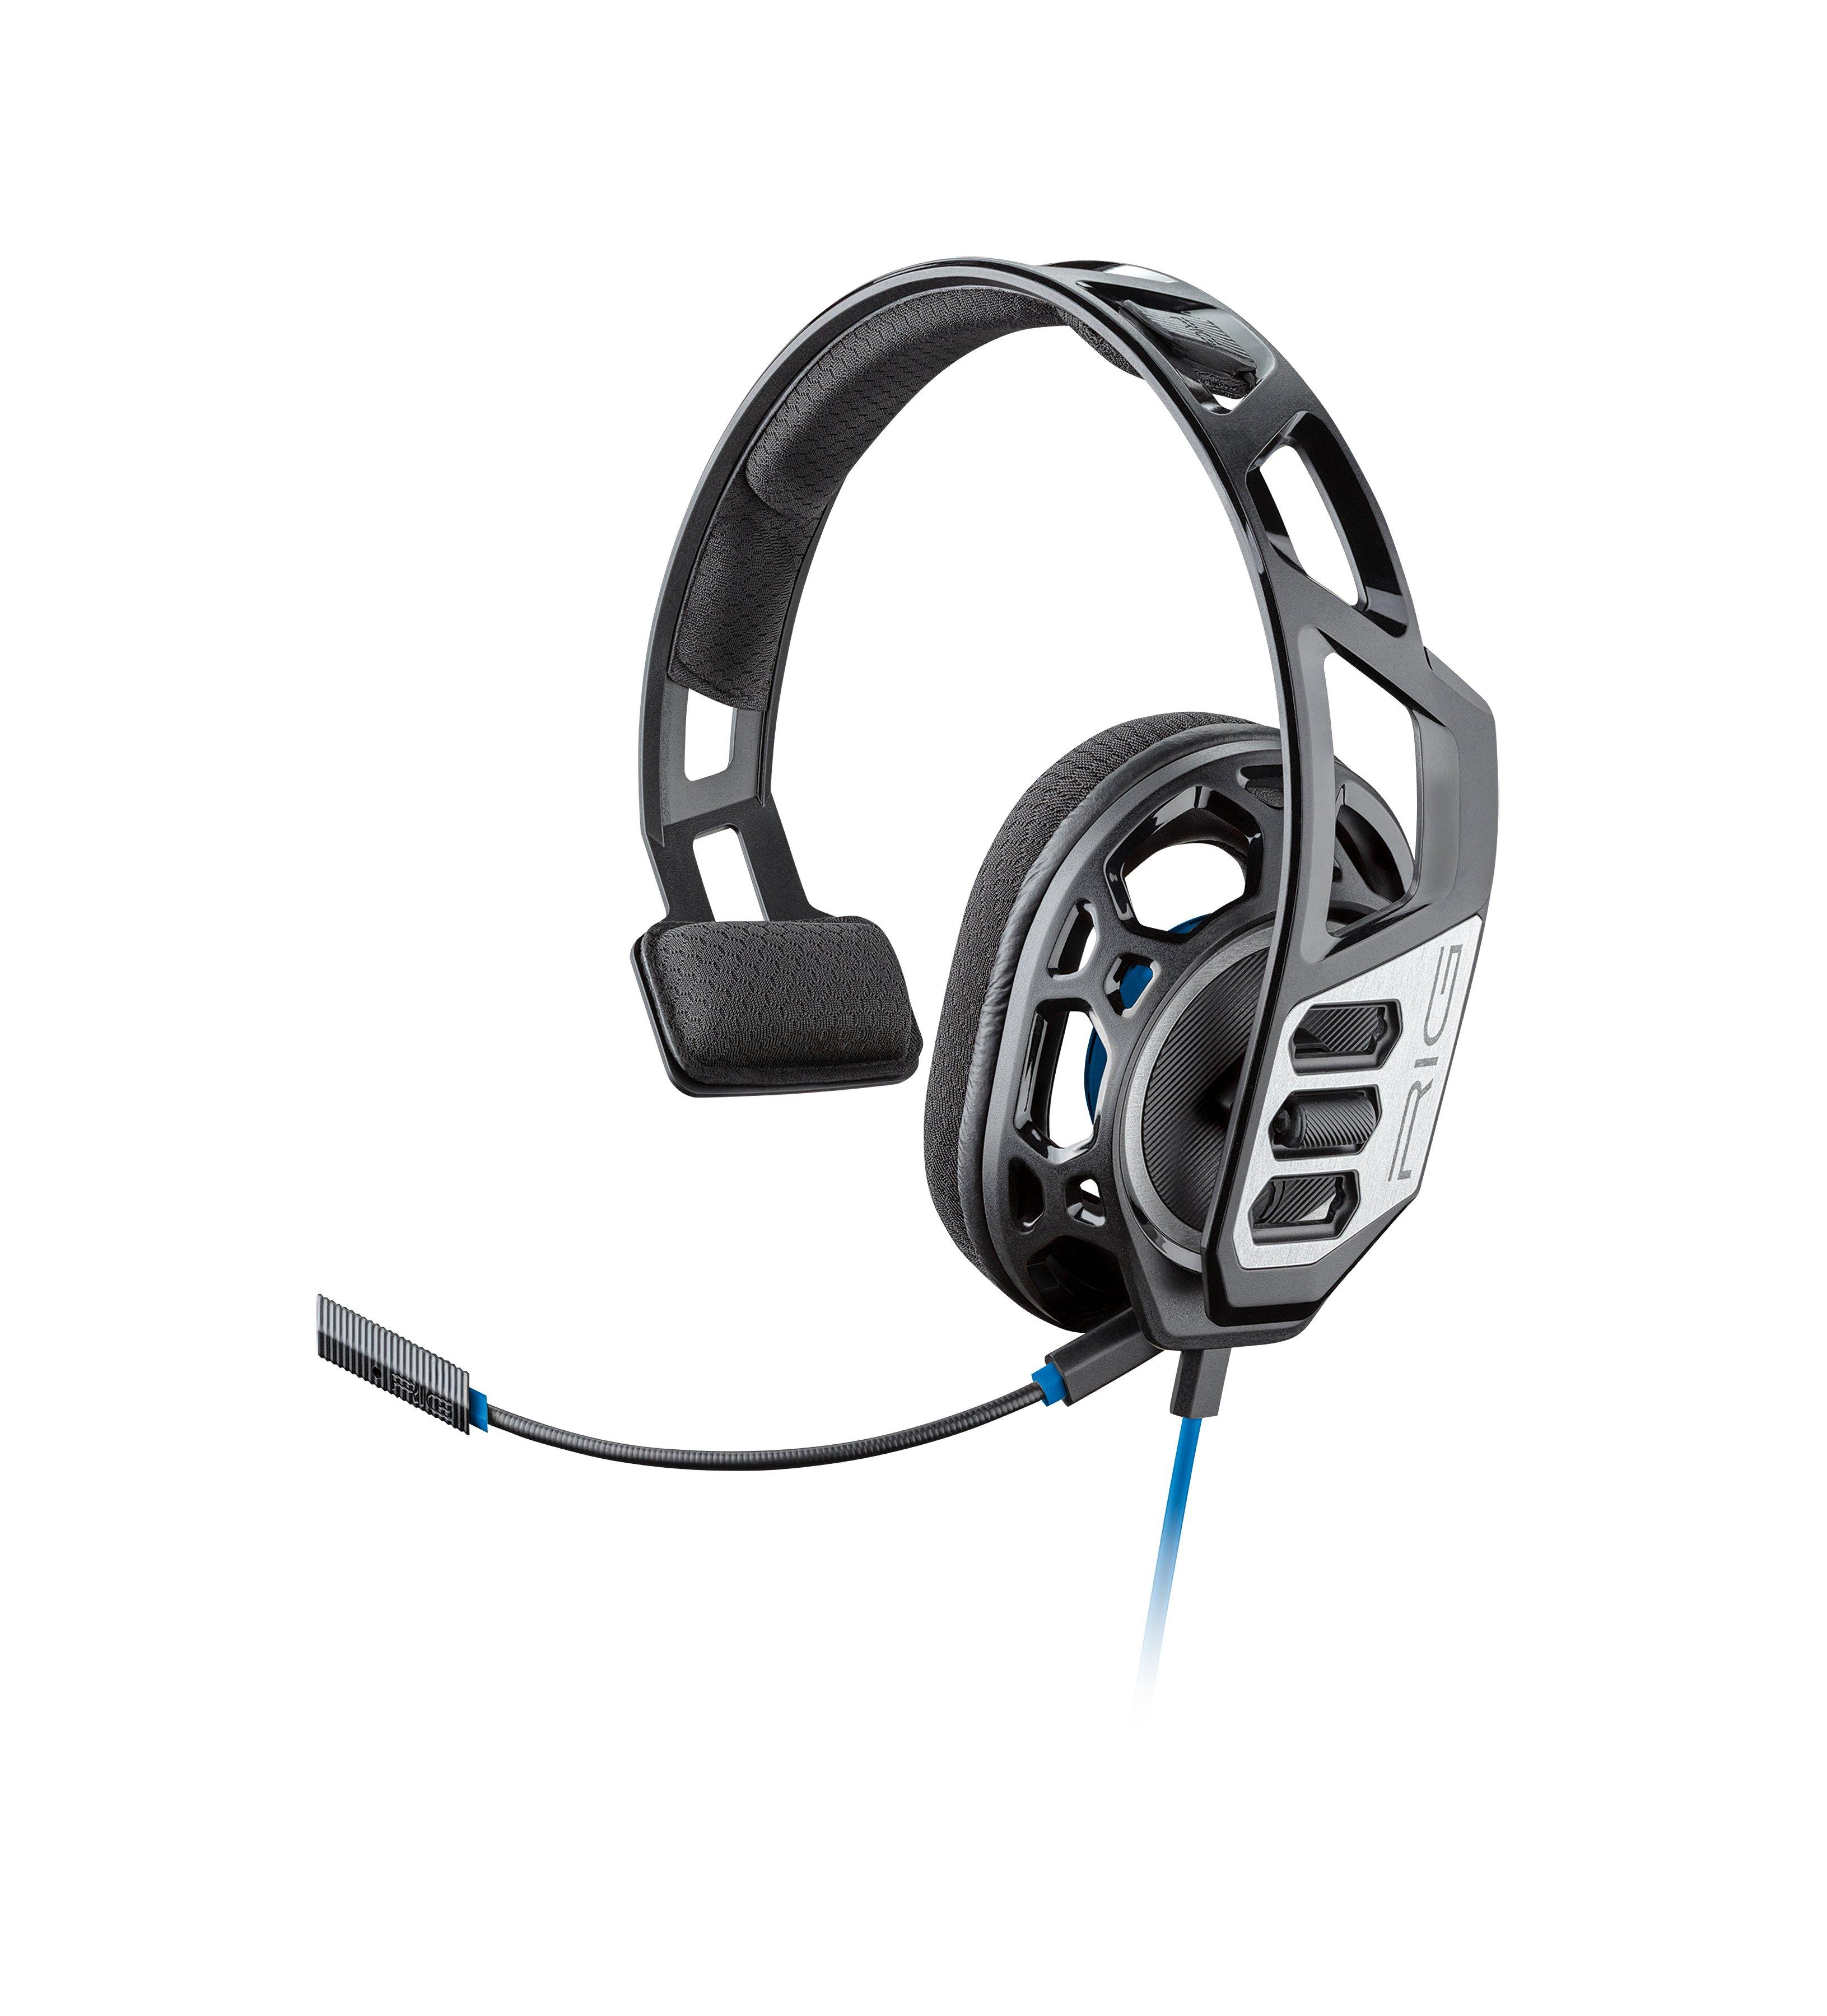 RIG 100HS Open ear, Full Range Wired Chat Headset for PlayStation 4